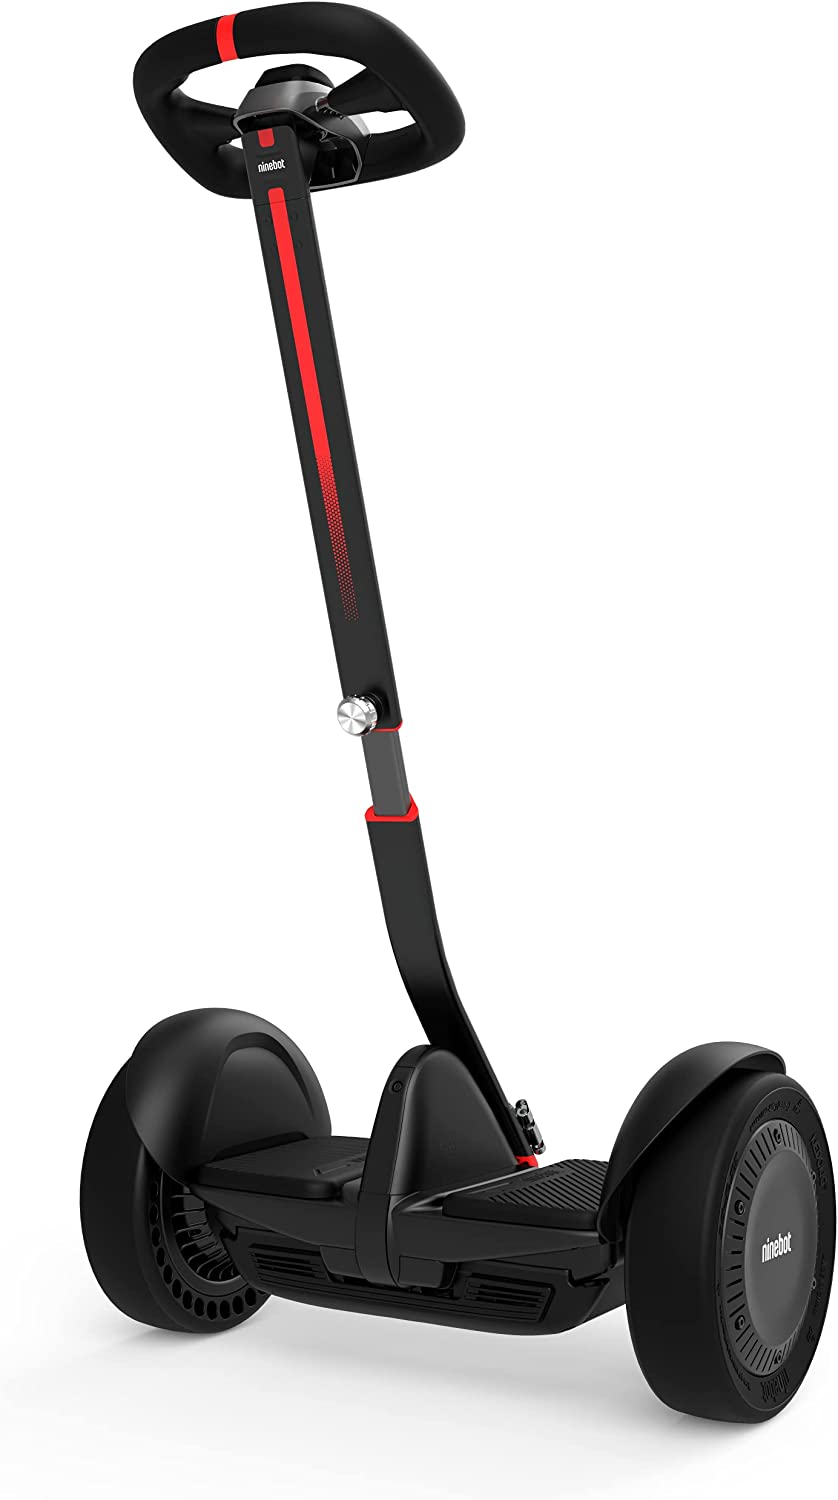 Segway Ninebot S Max Smart Self-Balancing Electric Scooter with LED Light -Black (Pre-Owned)